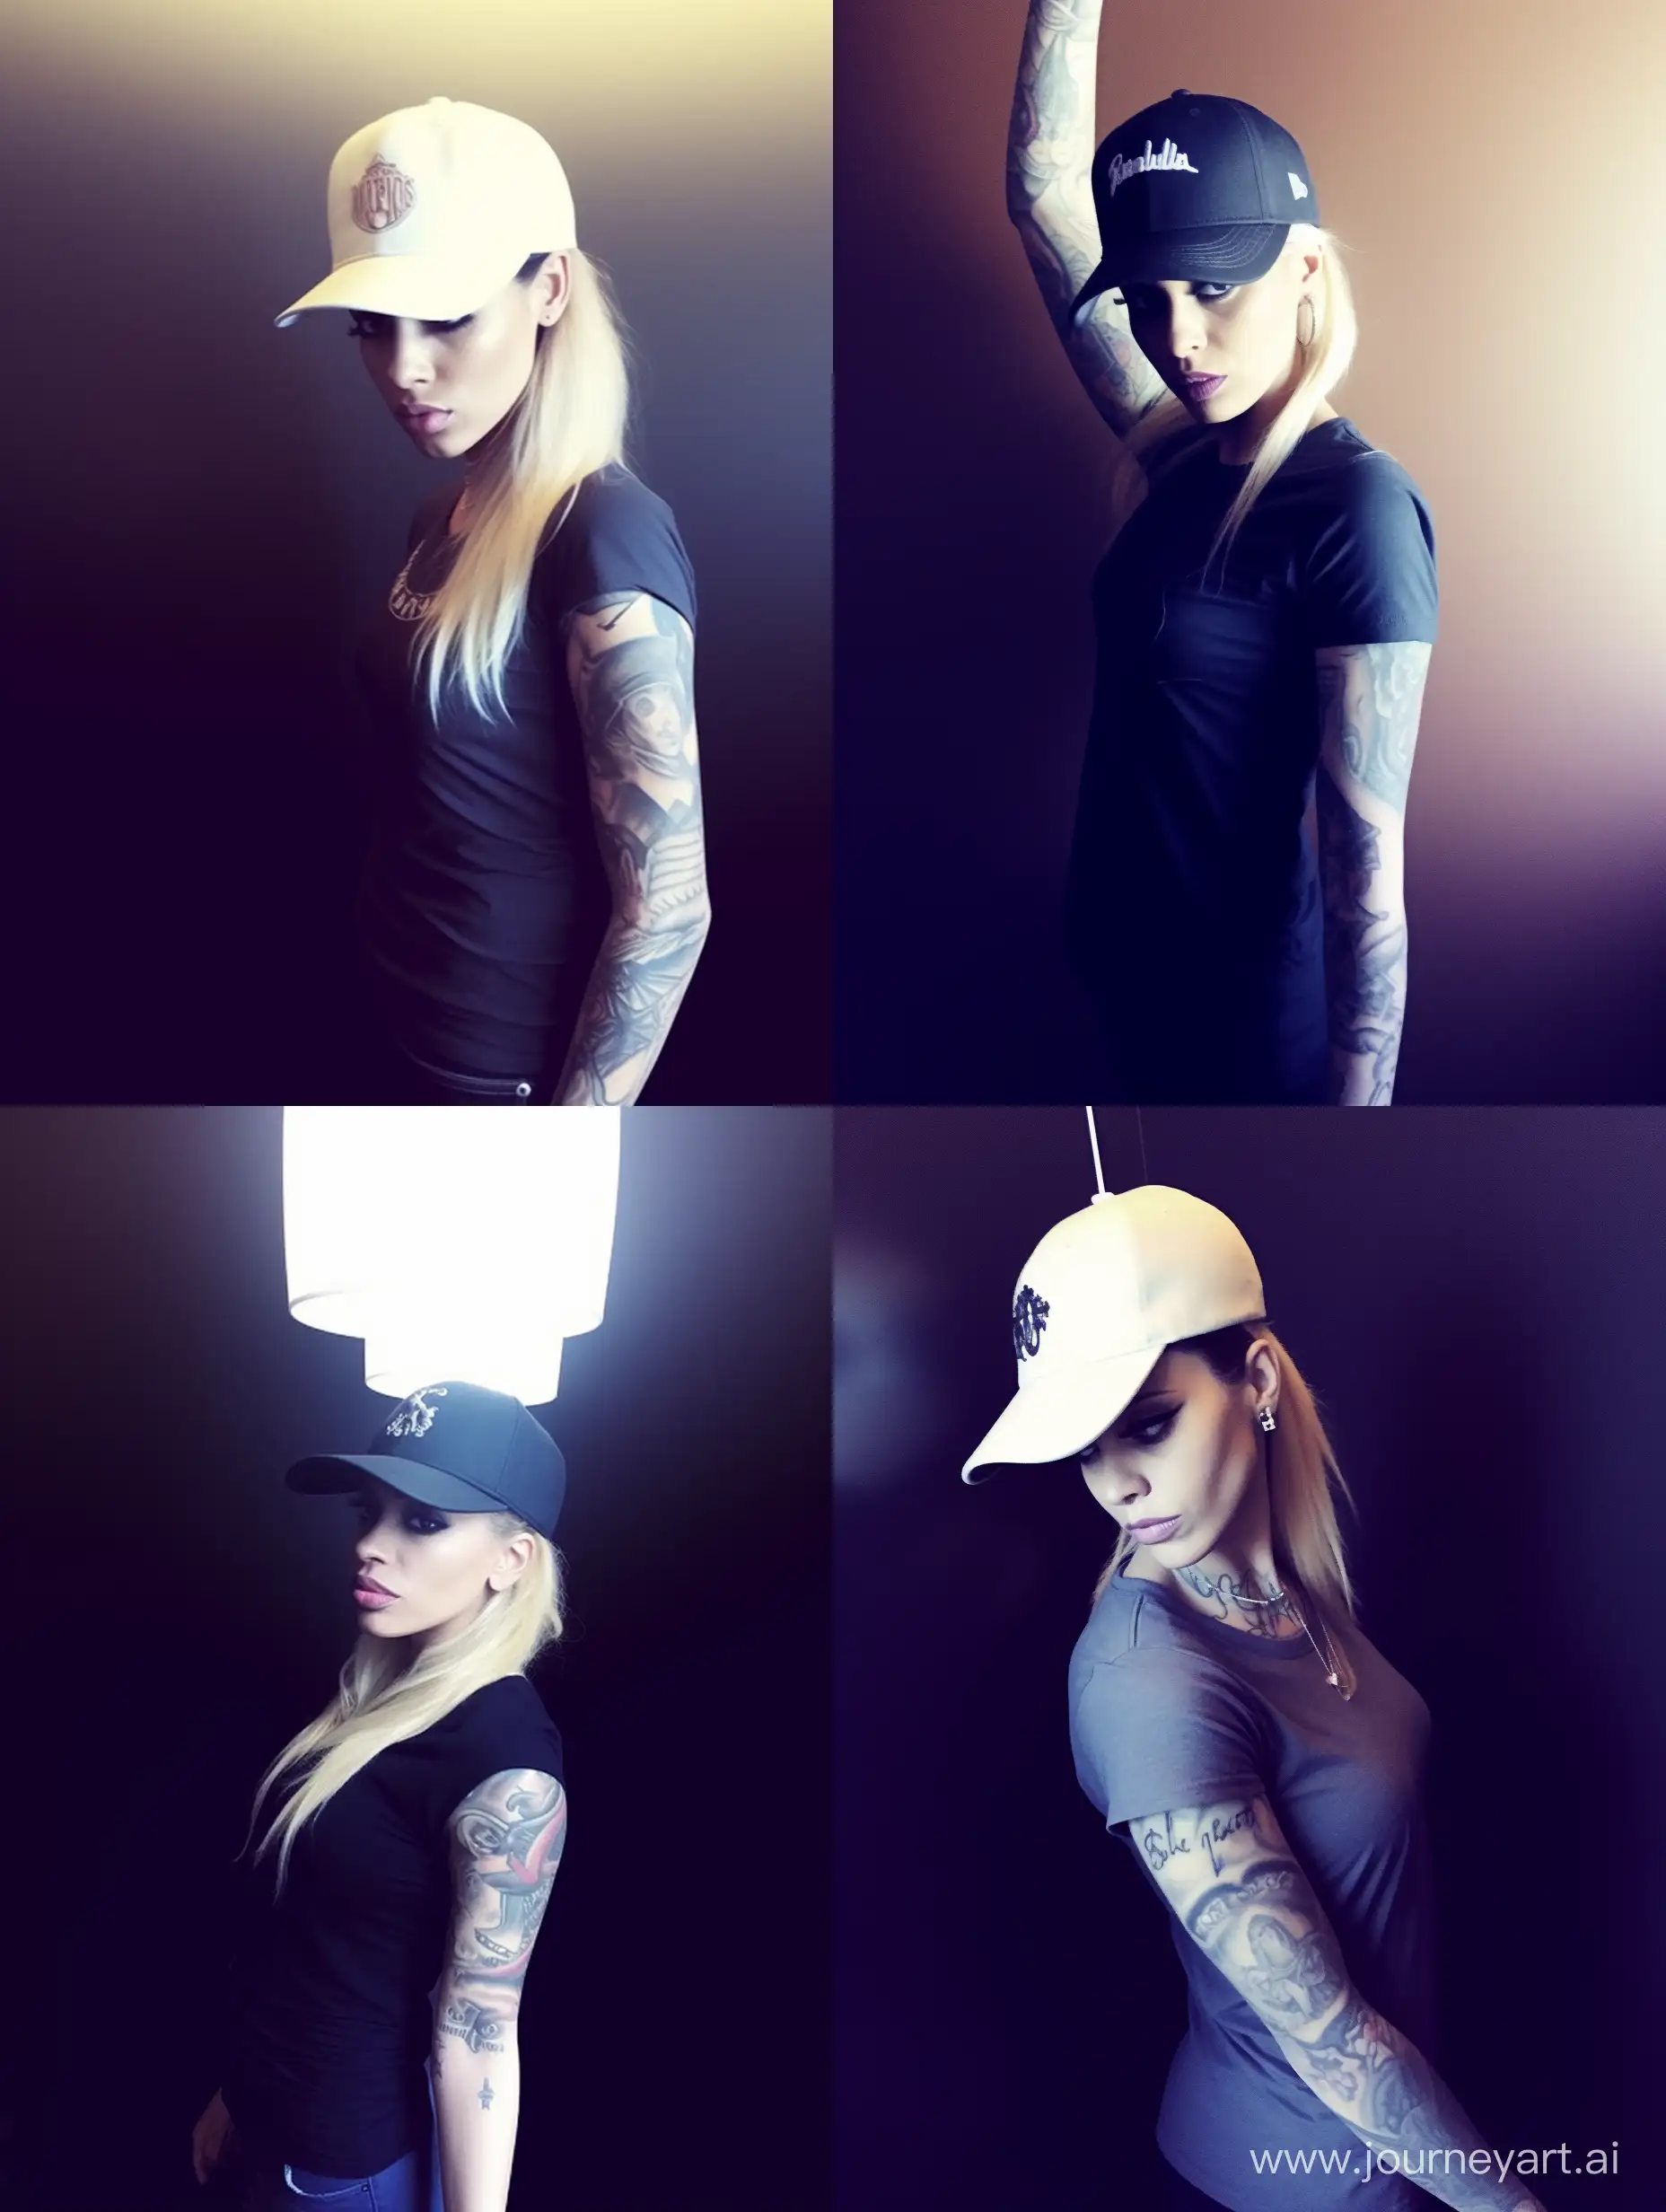 Interior selfie of a woman with tall blonde with tattoos and a beautiful nose in a cap, shot on a low camera quality phone
